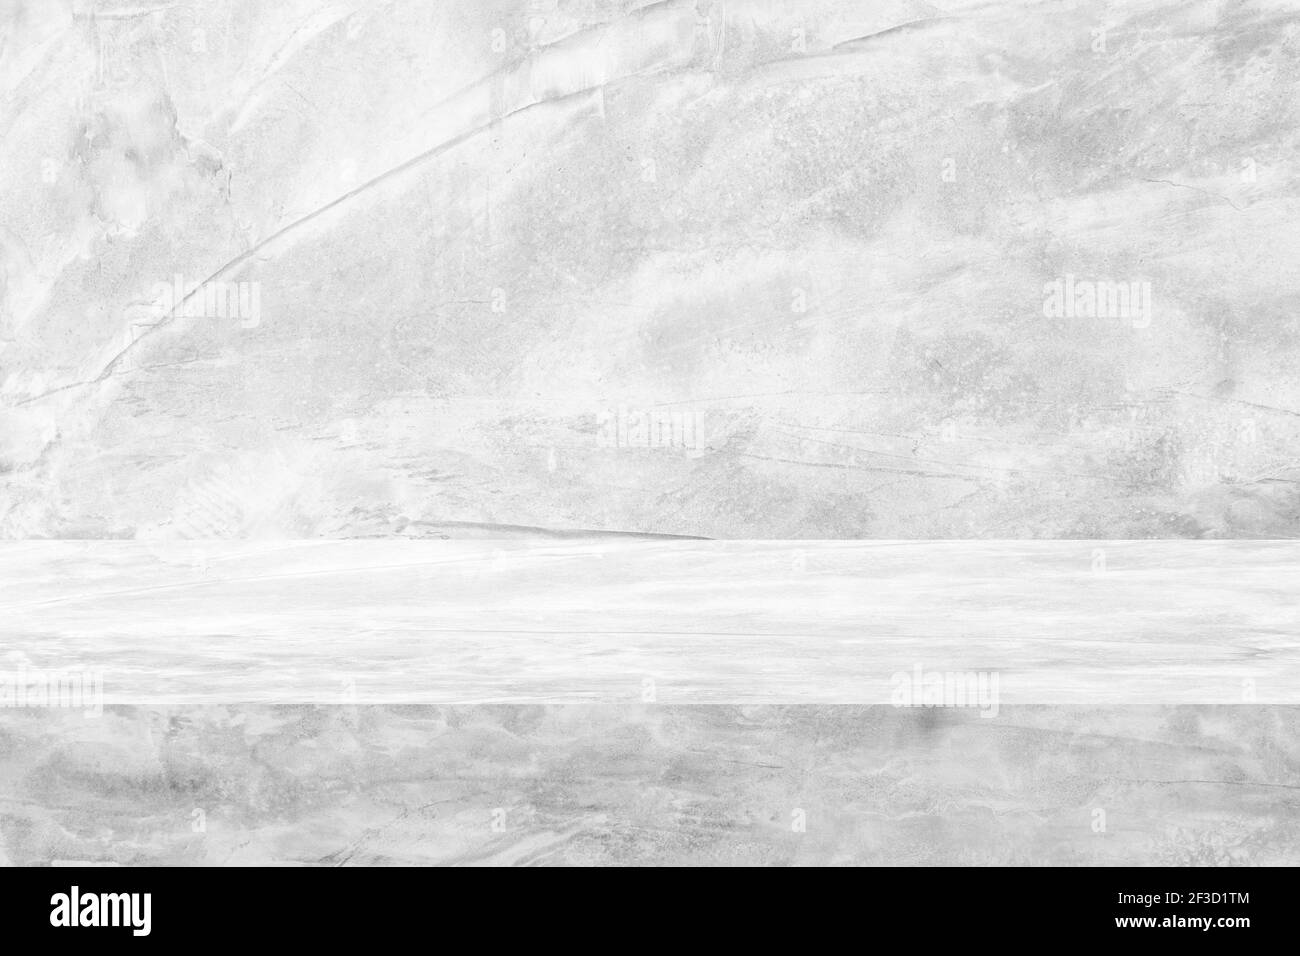 concrete texture table product display template background with copy space. Stock Photo